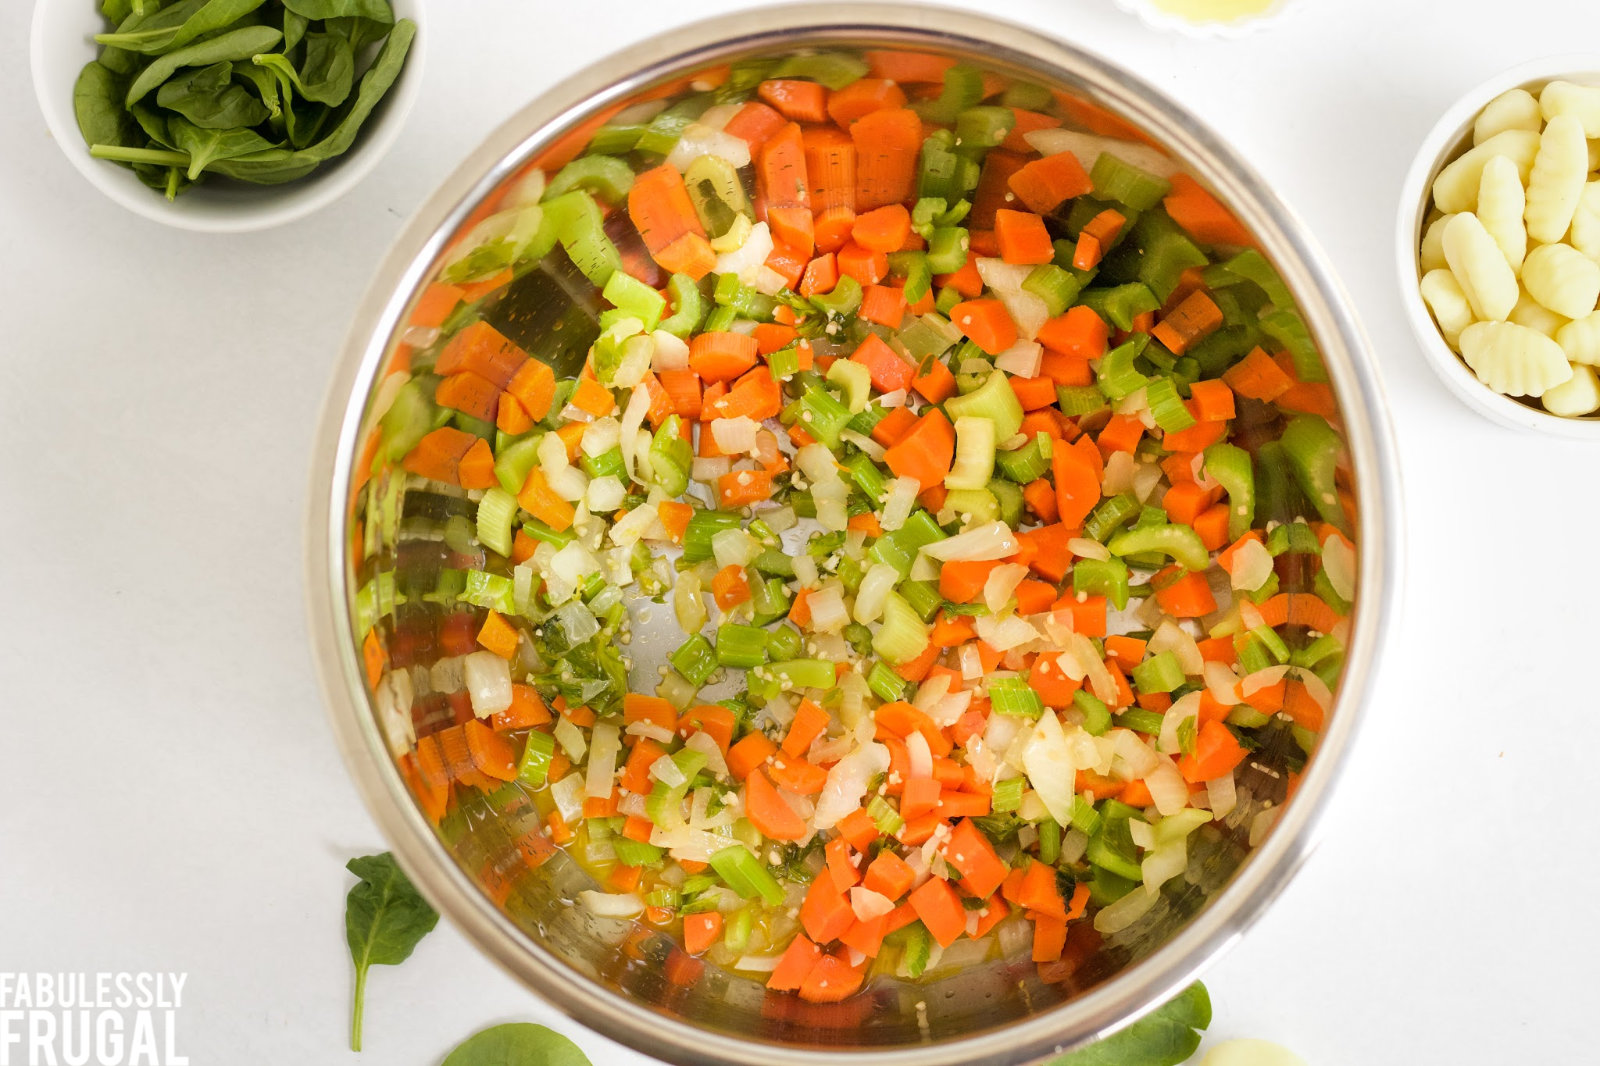 Onion, carrots, celery, and garlic in the instant pot